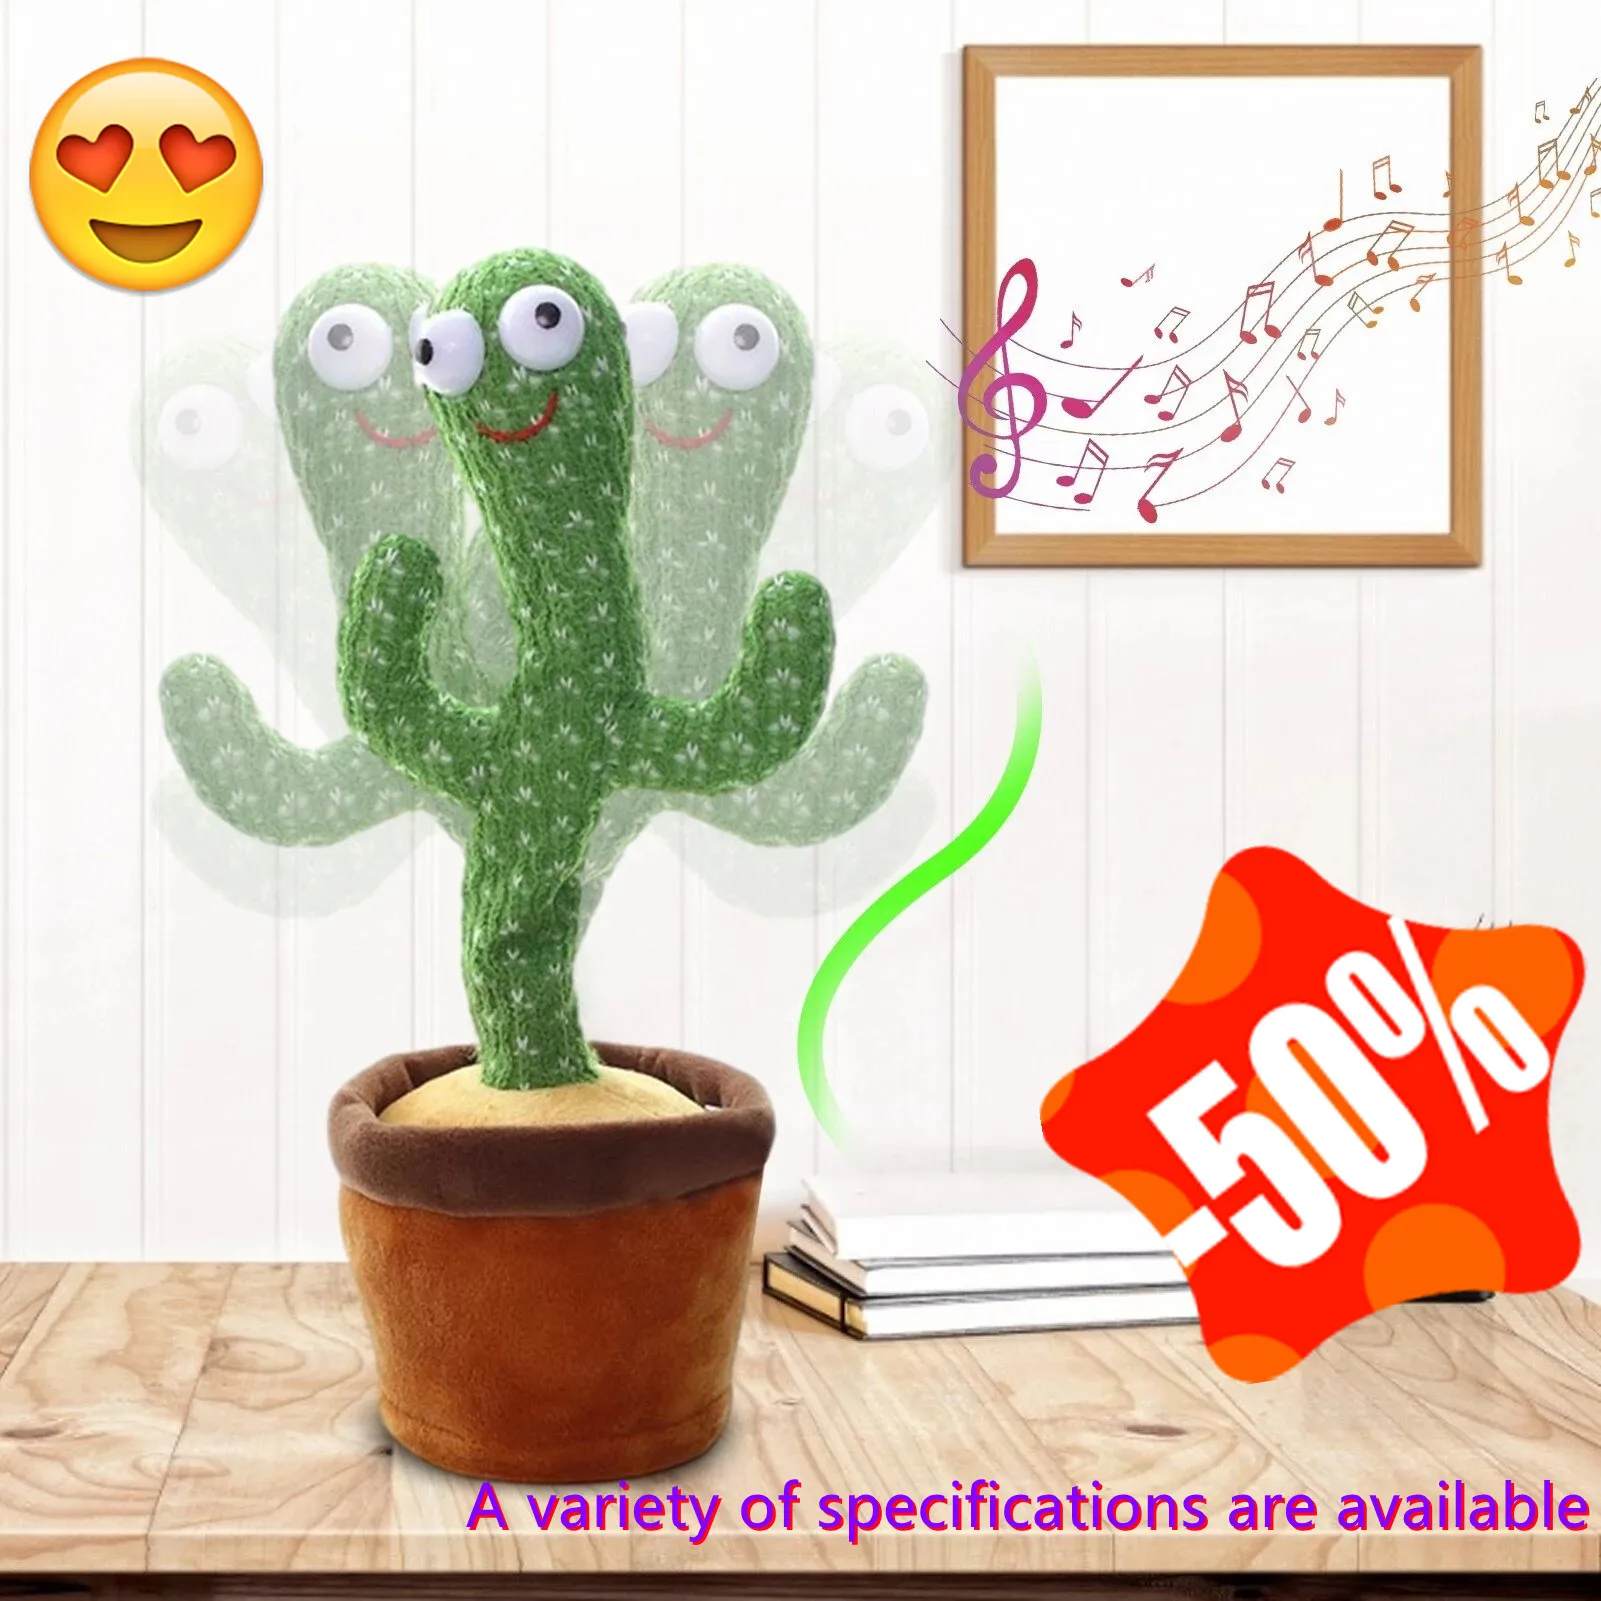 

Bluetooth Plush Dancing Cactus Toy Electronic Swing Dance Toy Recording Playback Function Dancing Cactus Family Decoration Gift